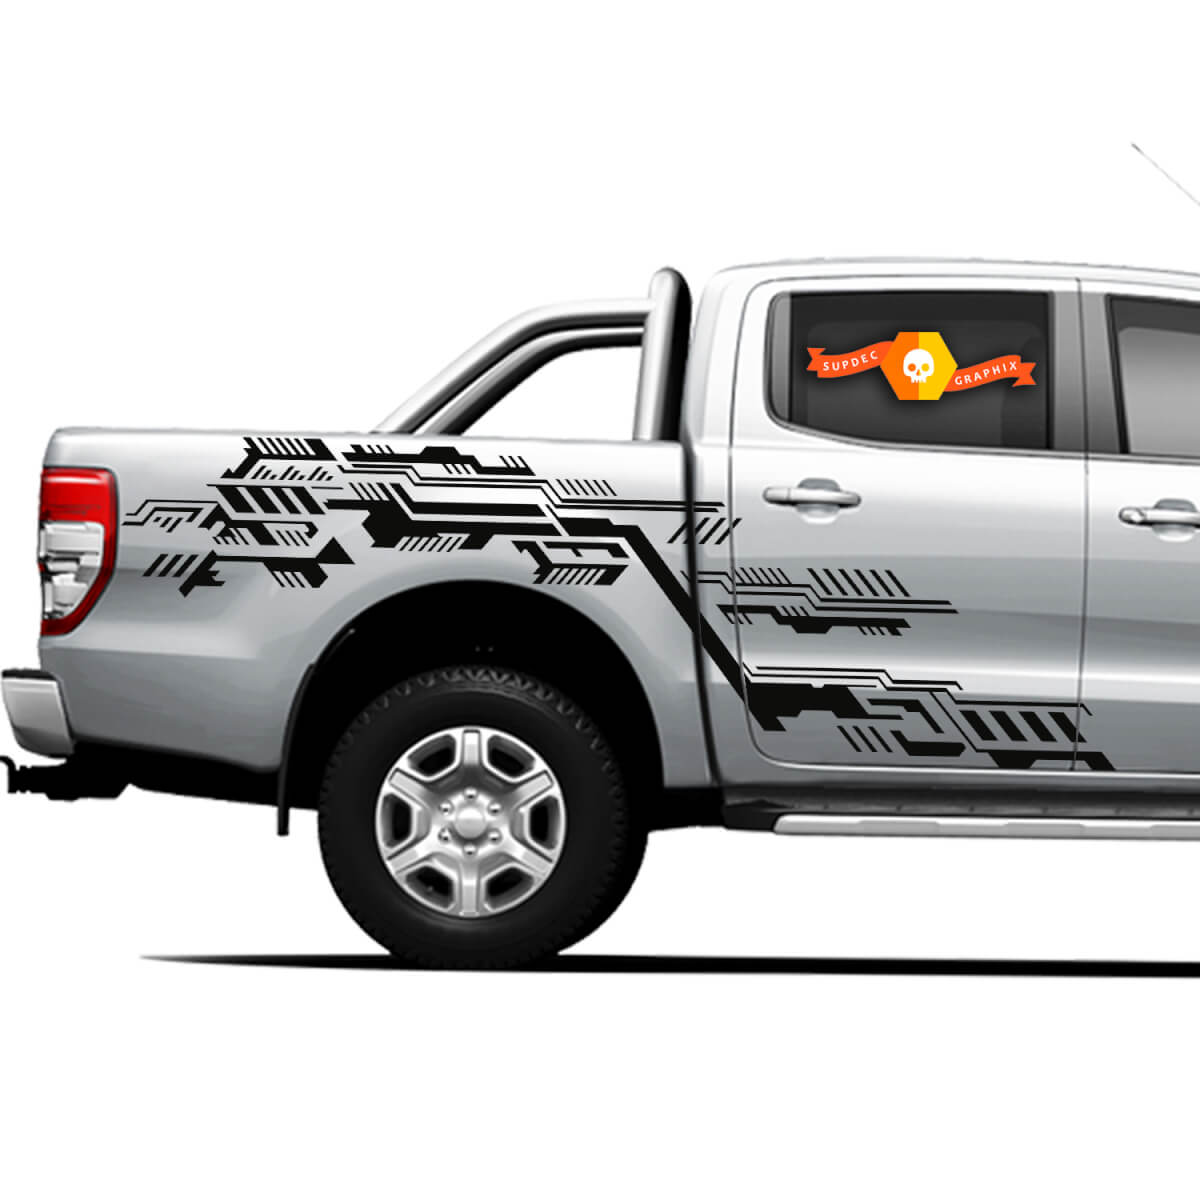 Pair 4×4 Truck Side Bed Graphics vinyl Decals for Ford Ranger Robo